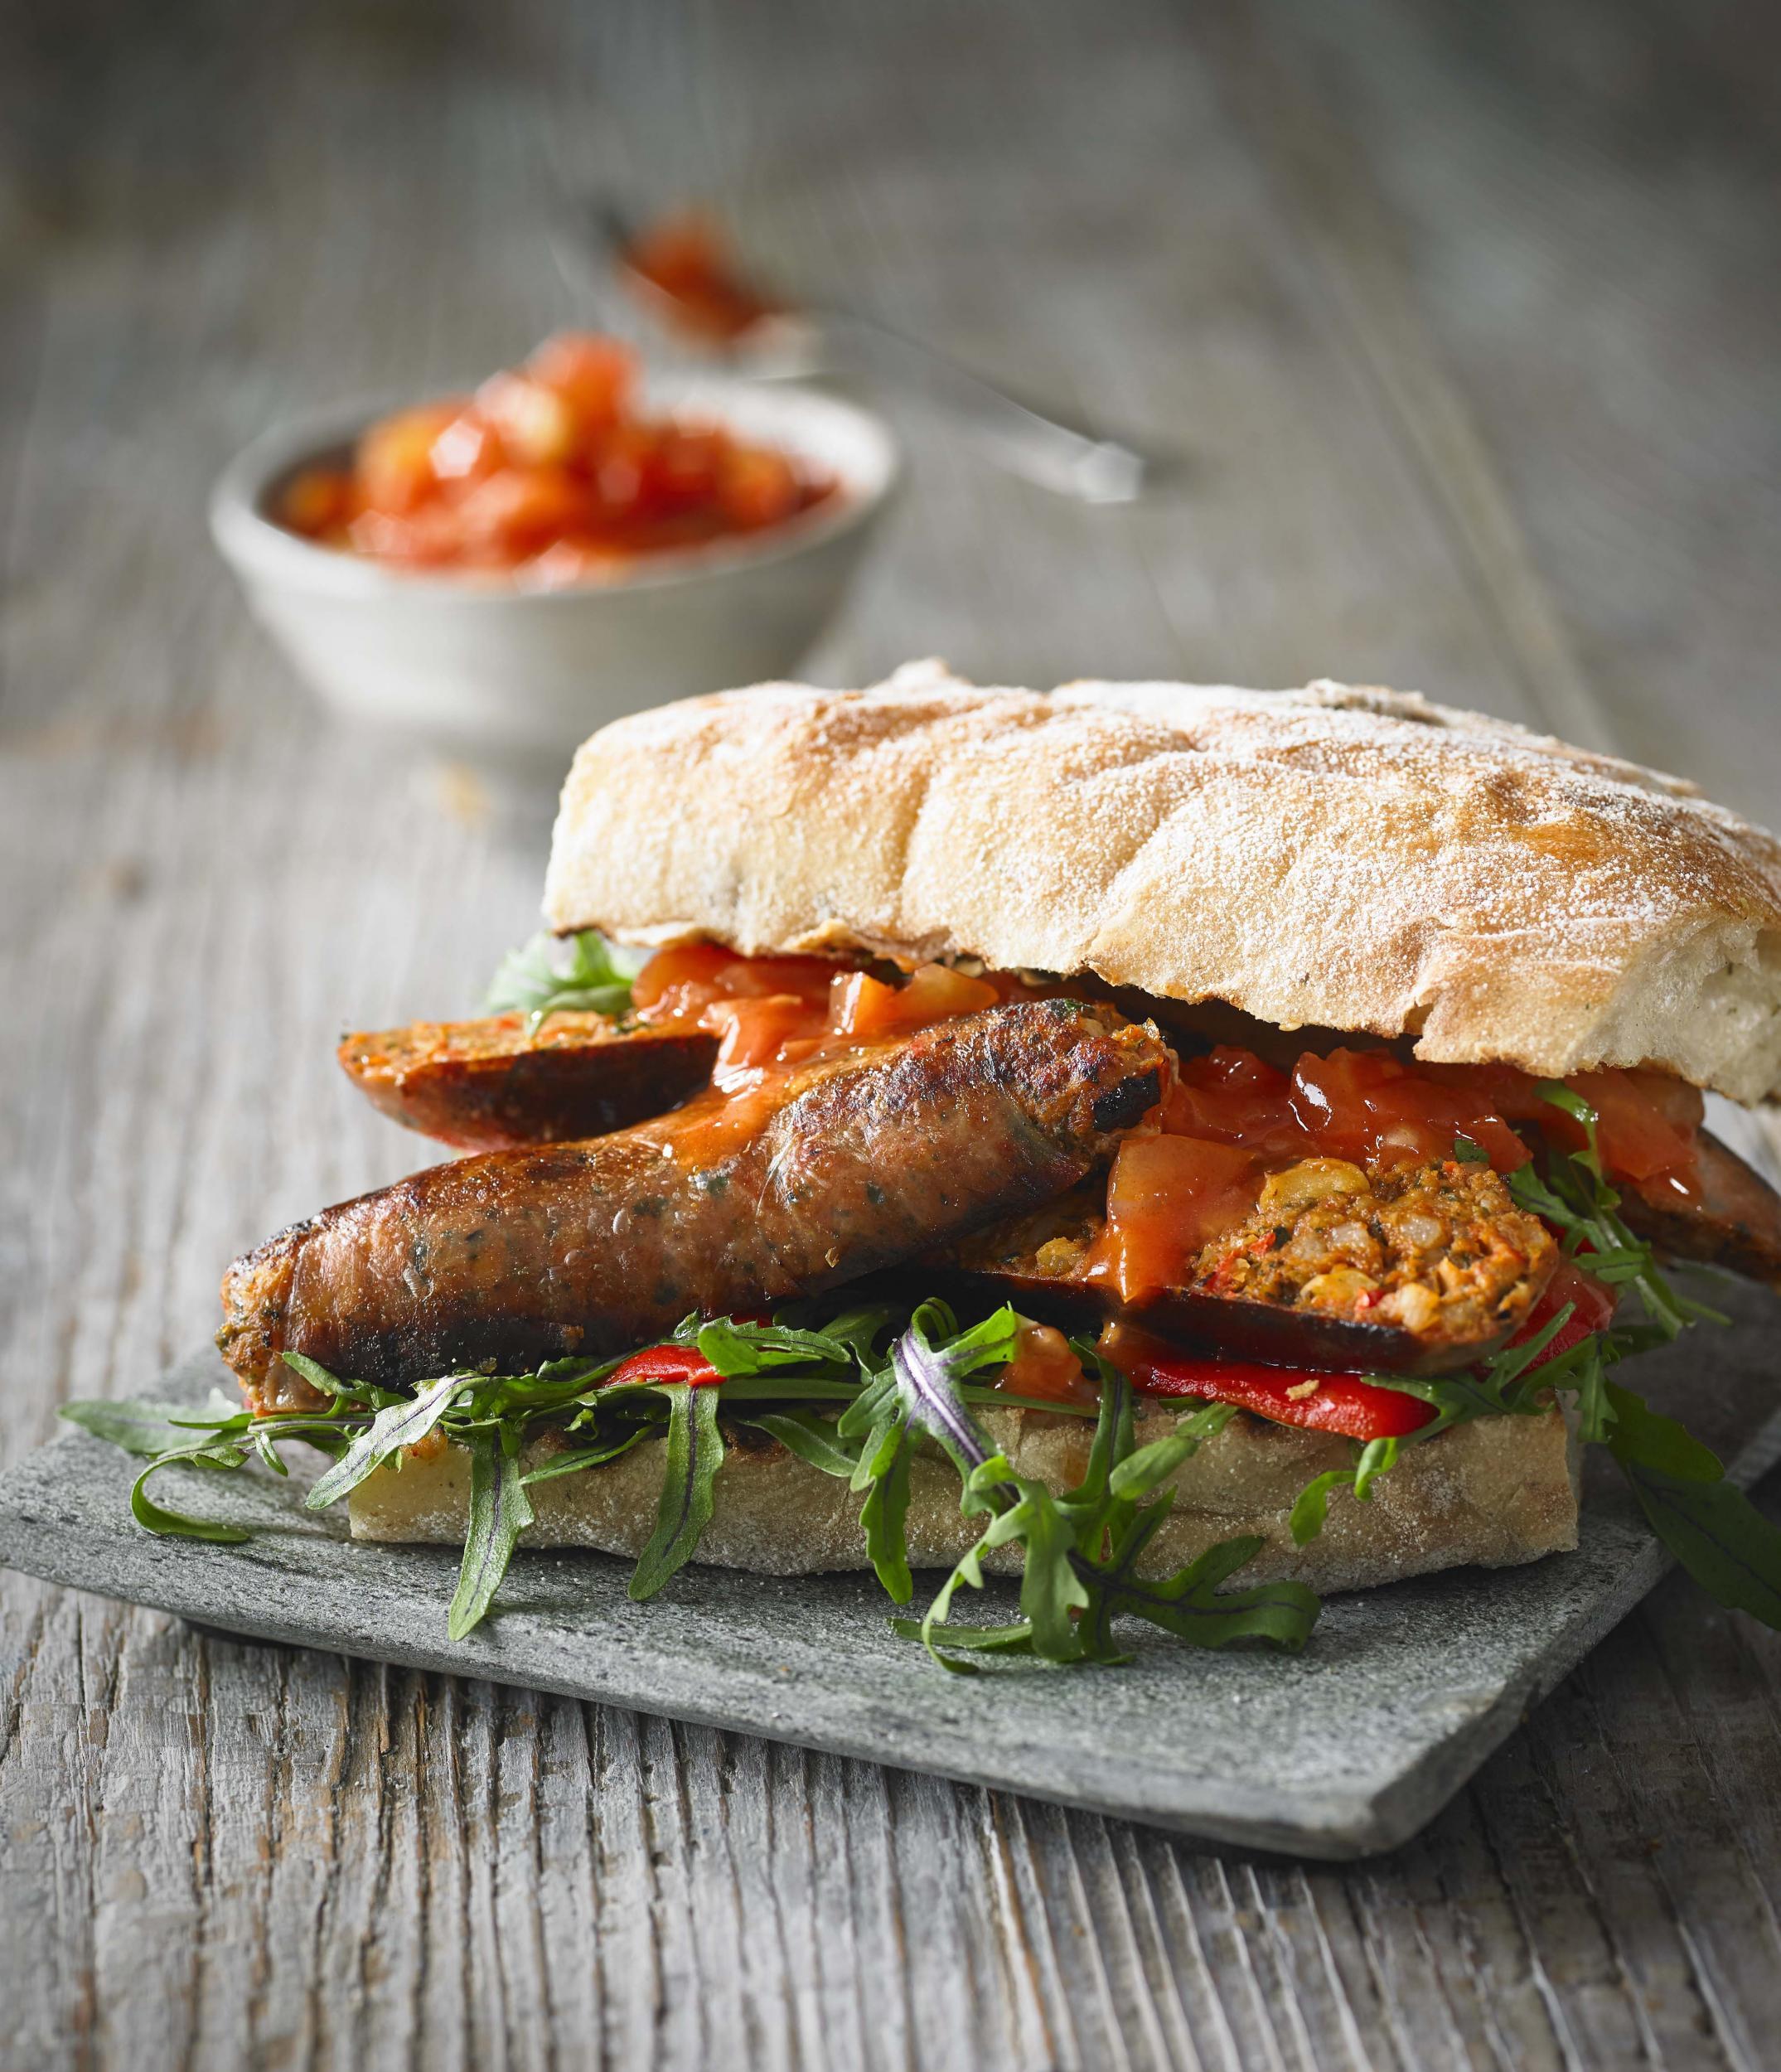 Waitrose's pork, chickpea, spinach and tomato sausages